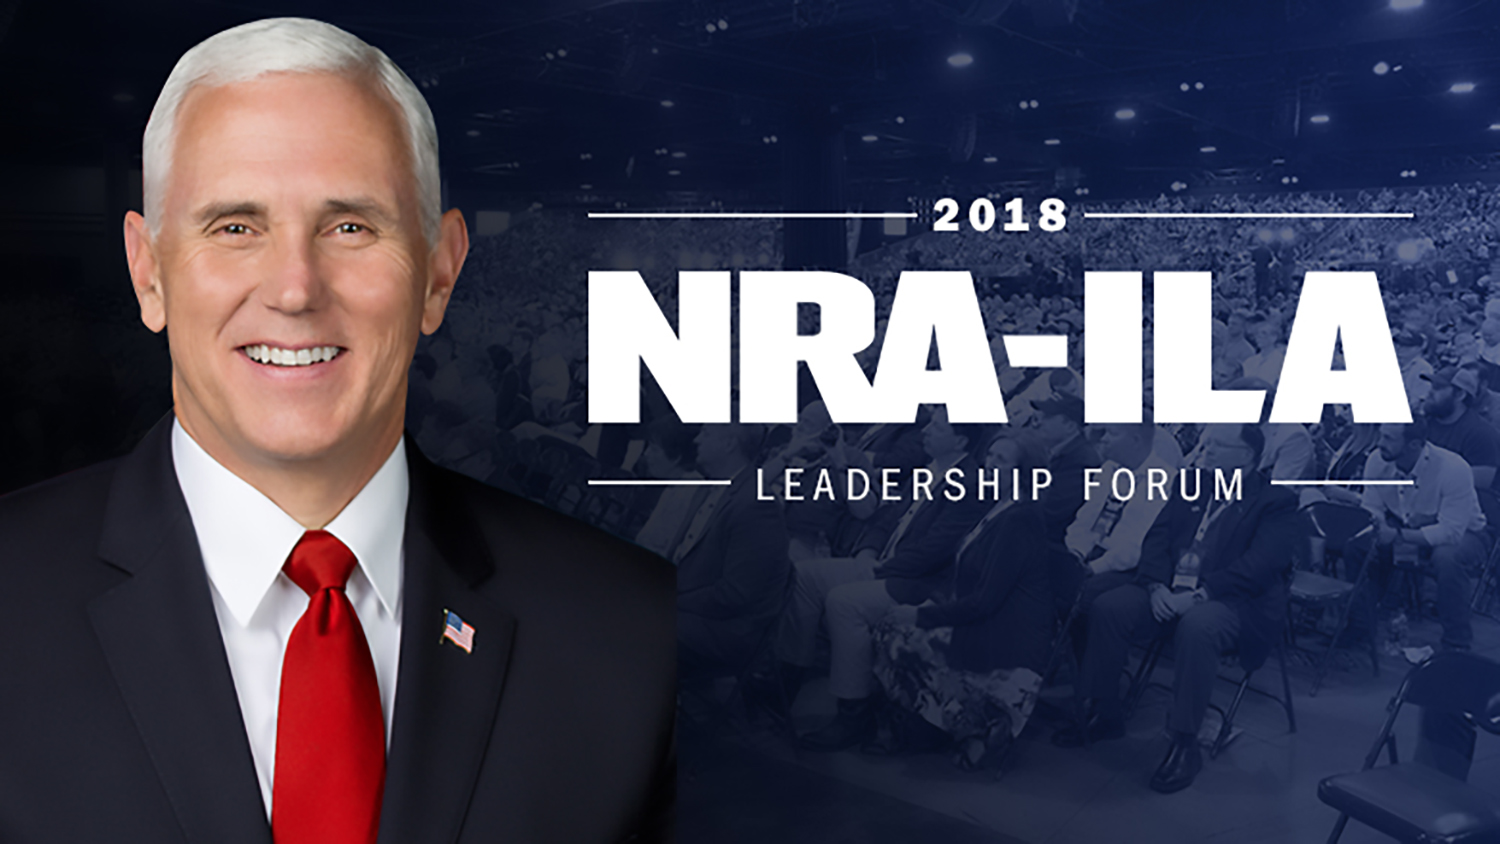 Vice President Pence to Speak at the 2018 NRA-ILA Leadership Forum